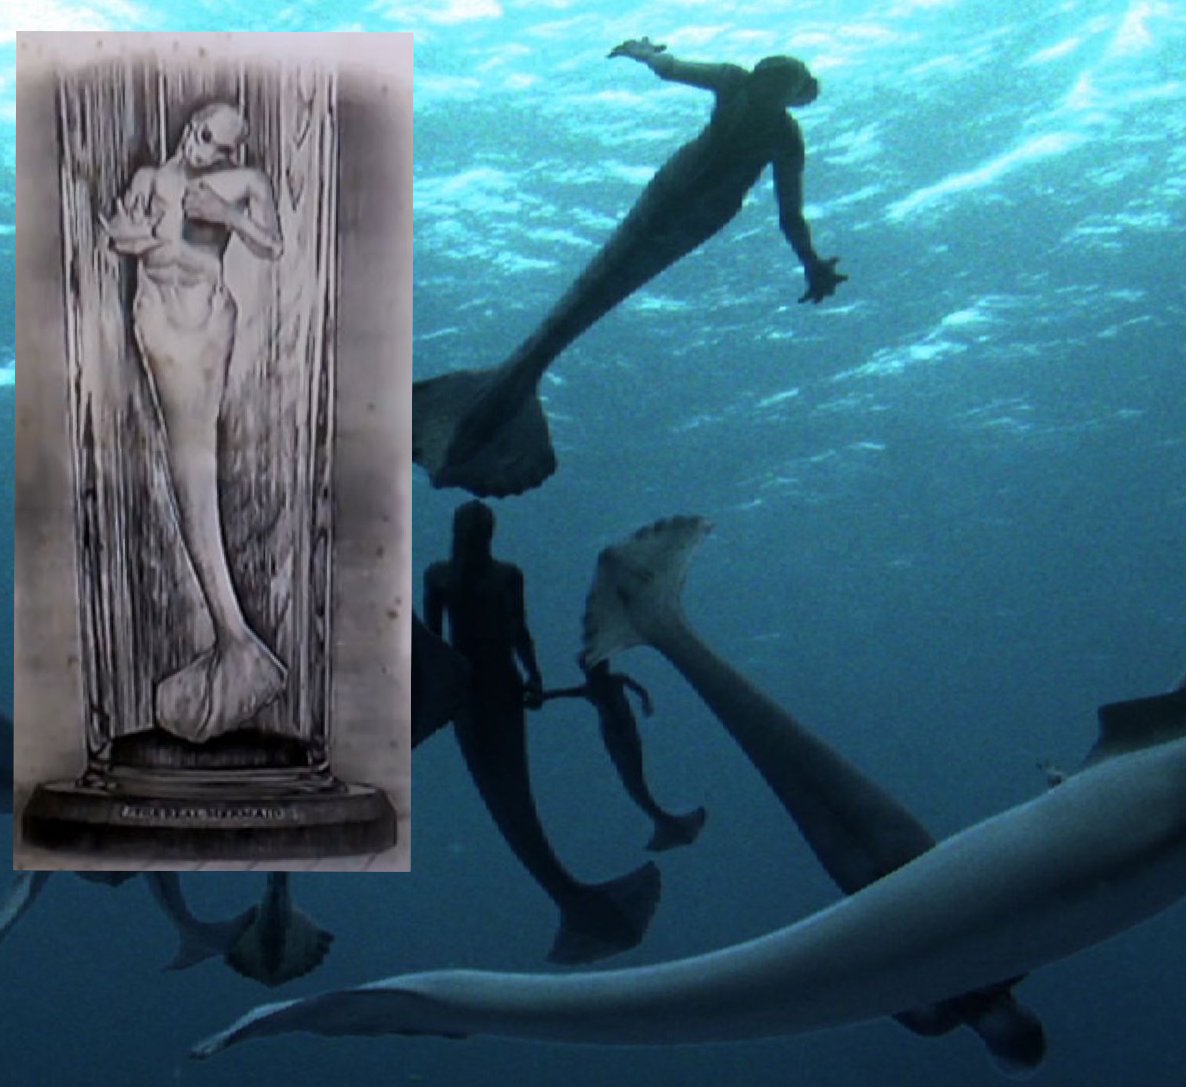 The real mermaid picture on the animation background.